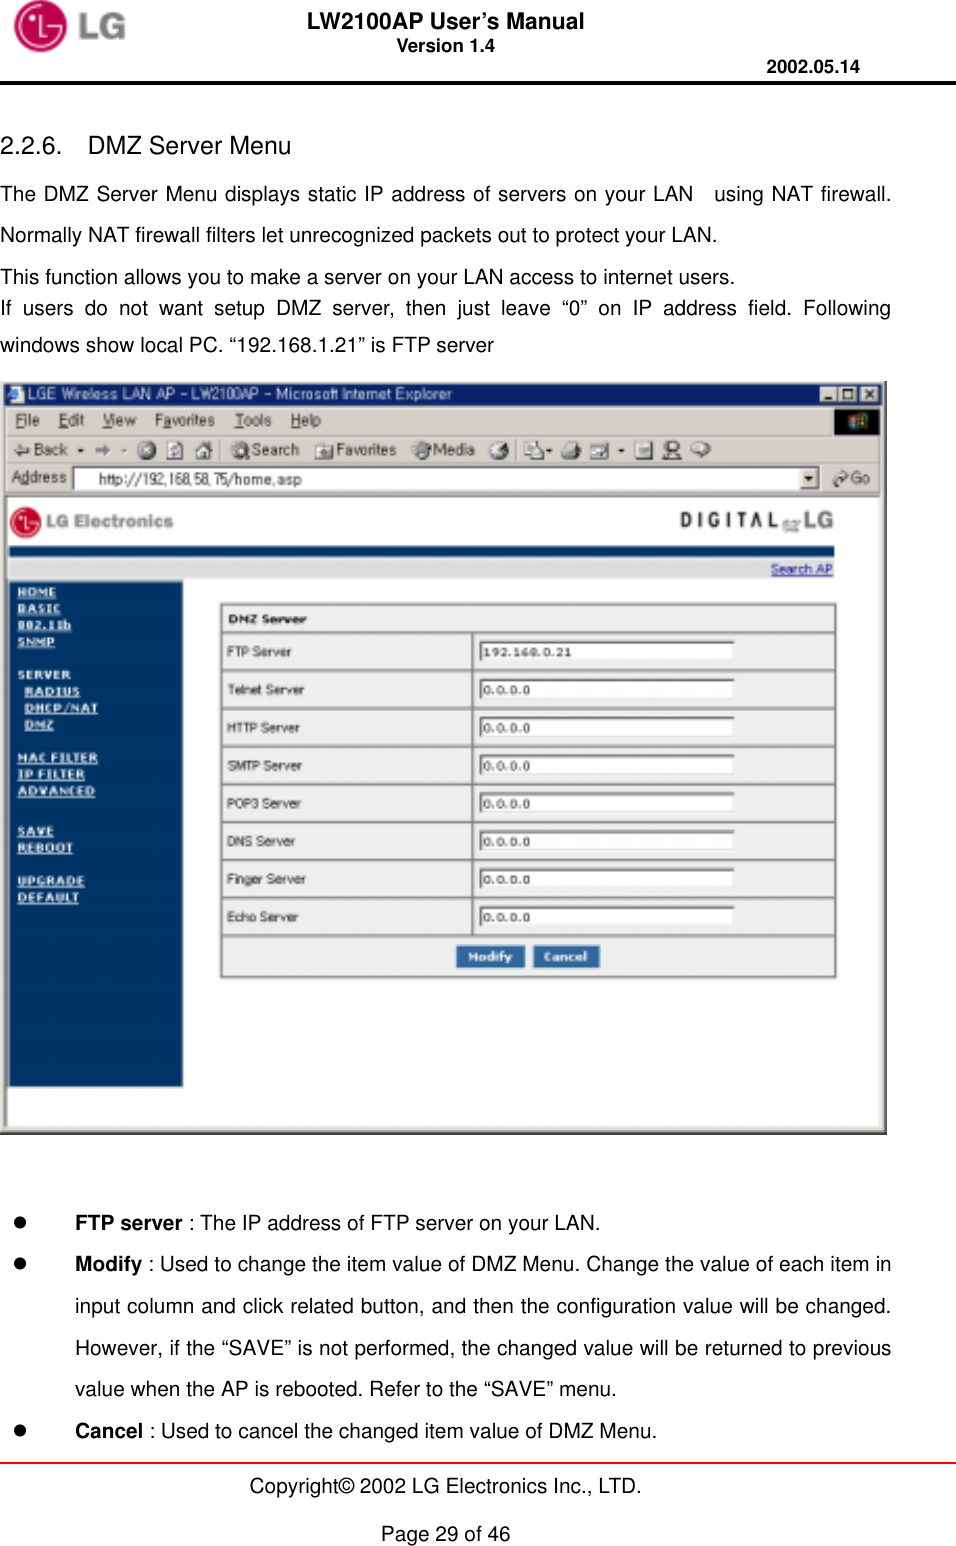 LW2100AP User’s Manual Version 1.4 2002.05.14   Copyright© 2002 LG Electronics Inc., LTD.  Page 29 of 46  2.2.6.  DMZ Server Menu The DMZ Server Menu displays static IP address of servers on your LAN  using NAT firewall. Normally NAT firewall filters let unrecognized packets out to protect your LAN. This function allows you to make a server on your LAN access to internet users. If users do not want setup DMZ server, then just leave “0” on IP address field. Following windows show local PC. “192.168.1.21” is FTP server     FTP server : The IP address of FTP server on your LAN.   Modify : Used to change the item value of DMZ Menu. Change the value of each item in input column and click related button, and then the configuration value will be changed. However, if the “SAVE” is not performed, the changed value will be returned to previous value when the AP is rebooted. Refer to the “SAVE” menu.   Cancel : Used to cancel the changed item value of DMZ Menu. 